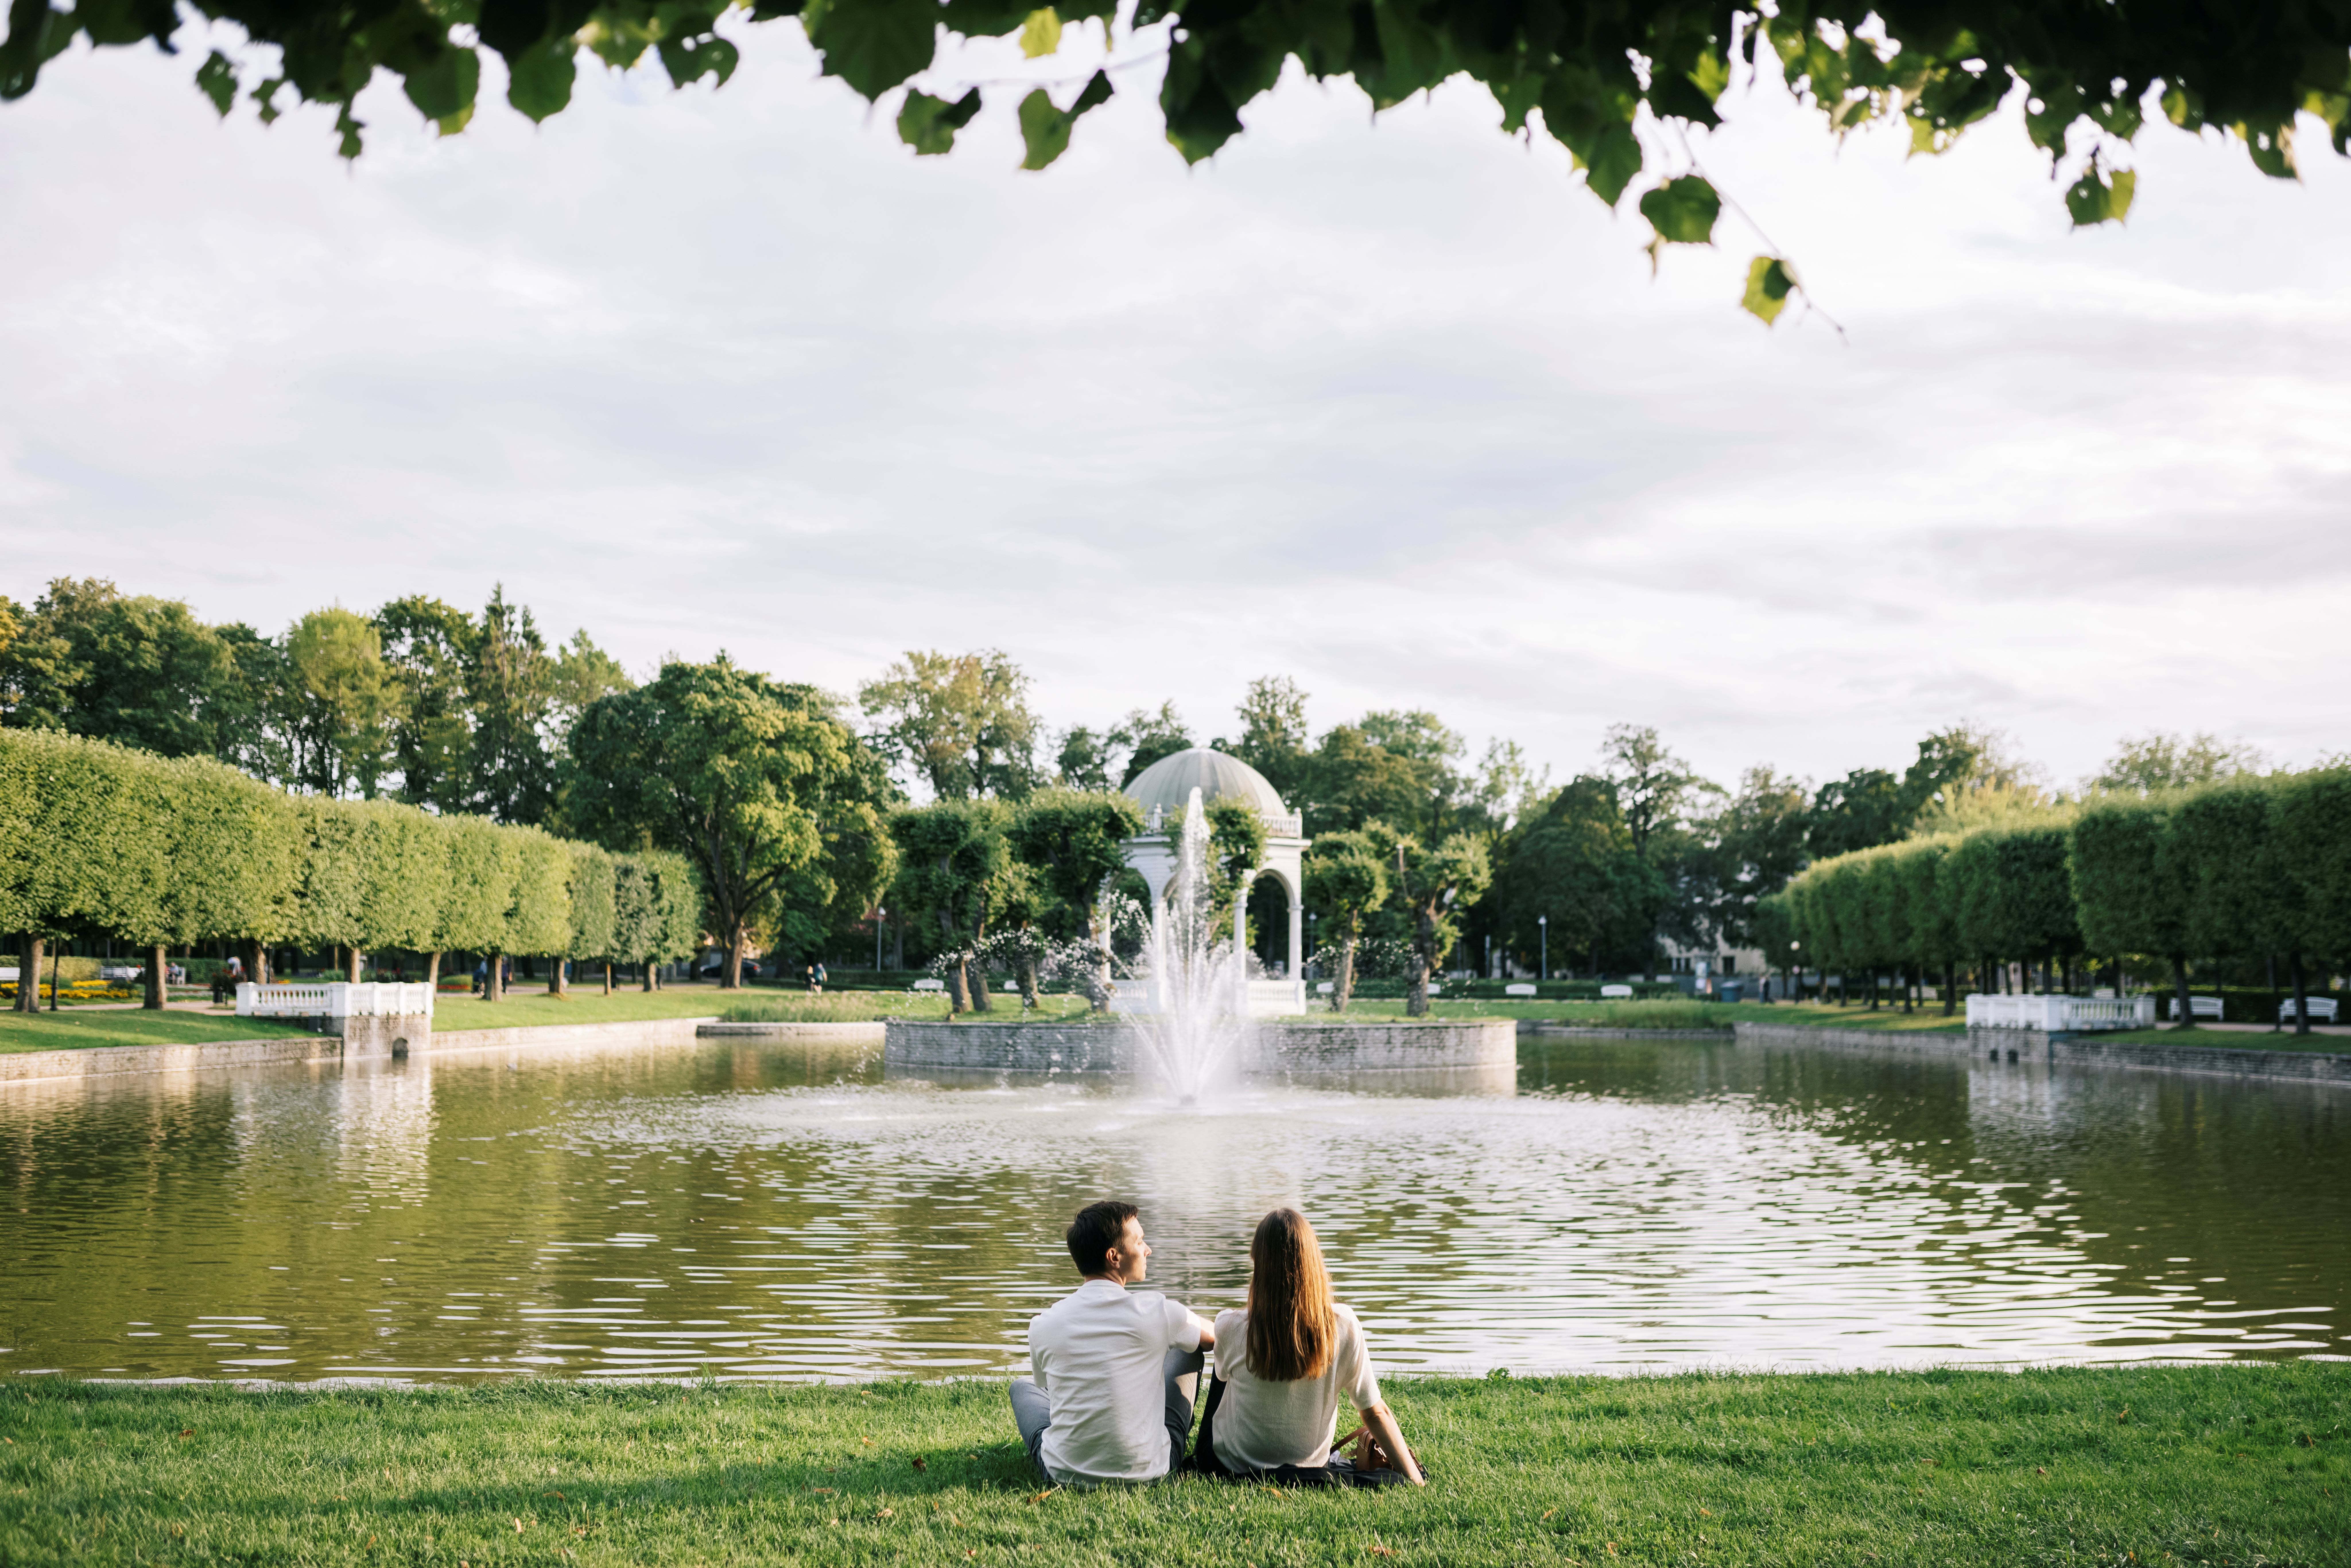 Man and woman sitting on the grass by the swan pond and pavilion in Kadriorg Park